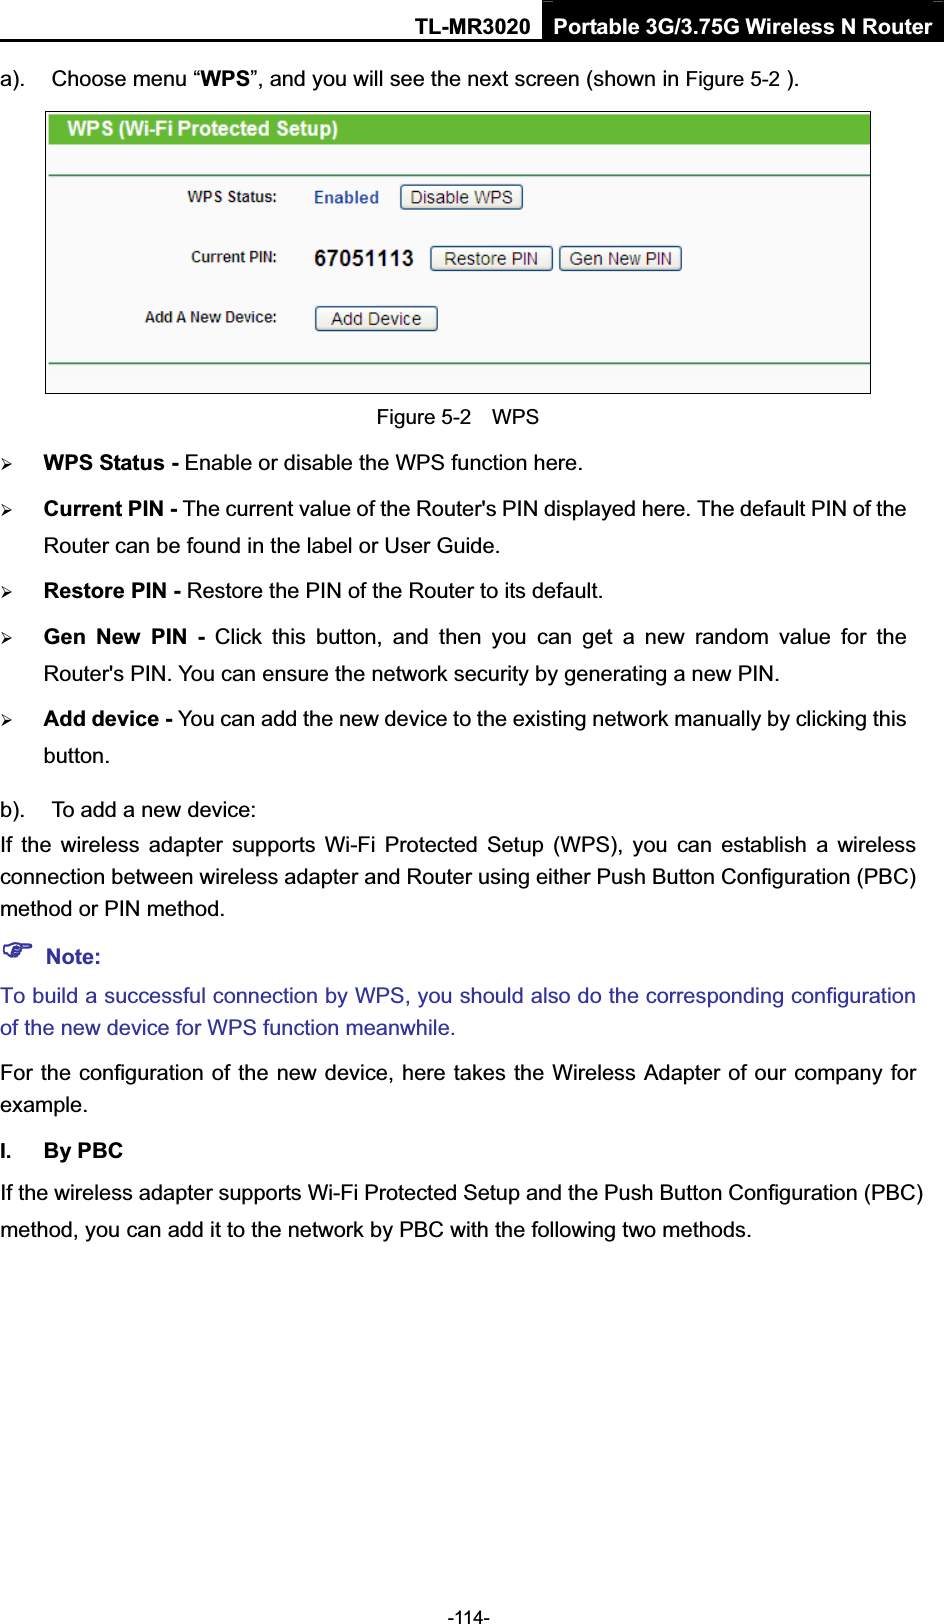 TL-MR3020 Portable 3G/3.75G Wireless N Router-114- a).  Choose menu “WPS”, and you will see the next screen (shown in Figure 5-2 ). Figure 5-2    WPS ¾WPS Status - Enable or disable the WPS function here.   ¾Current PIN - The current value of the Router&apos;s PIN displayed here. The default PIN of the Router can be found in the label or User Guide.   ¾Restore PIN - Restore the PIN of the Router to its default.   ¾Gen  New  PIN  -  Click  this  button,  and  then  you  can  get  a  new  random  value  for  the Router&apos;s PIN. You can ensure the network security by generating a new PIN.   ¾Add device - You can add the new device to the existing network manually by clicking this button.b).  To add a new device: If  the  wireless  adapter  supports  Wi-Fi  Protected Setup  (WPS),  you  can  establish  a  wireless connection between wireless adapter and Router using either Push Button Configuration (PBC) method or PIN method. )Note:To build a successful connection by WPS, you should also do the corresponding configuration of the new device for WPS function meanwhile. For the configuration of the new device, here takes the Wireless Adapter of our company for example.I.  By PBC If the wireless adapter supports Wi-Fi Protected Setup and the Push Button Configuration (PBC) method, you can add it to the network by PBC with the following two methods. 